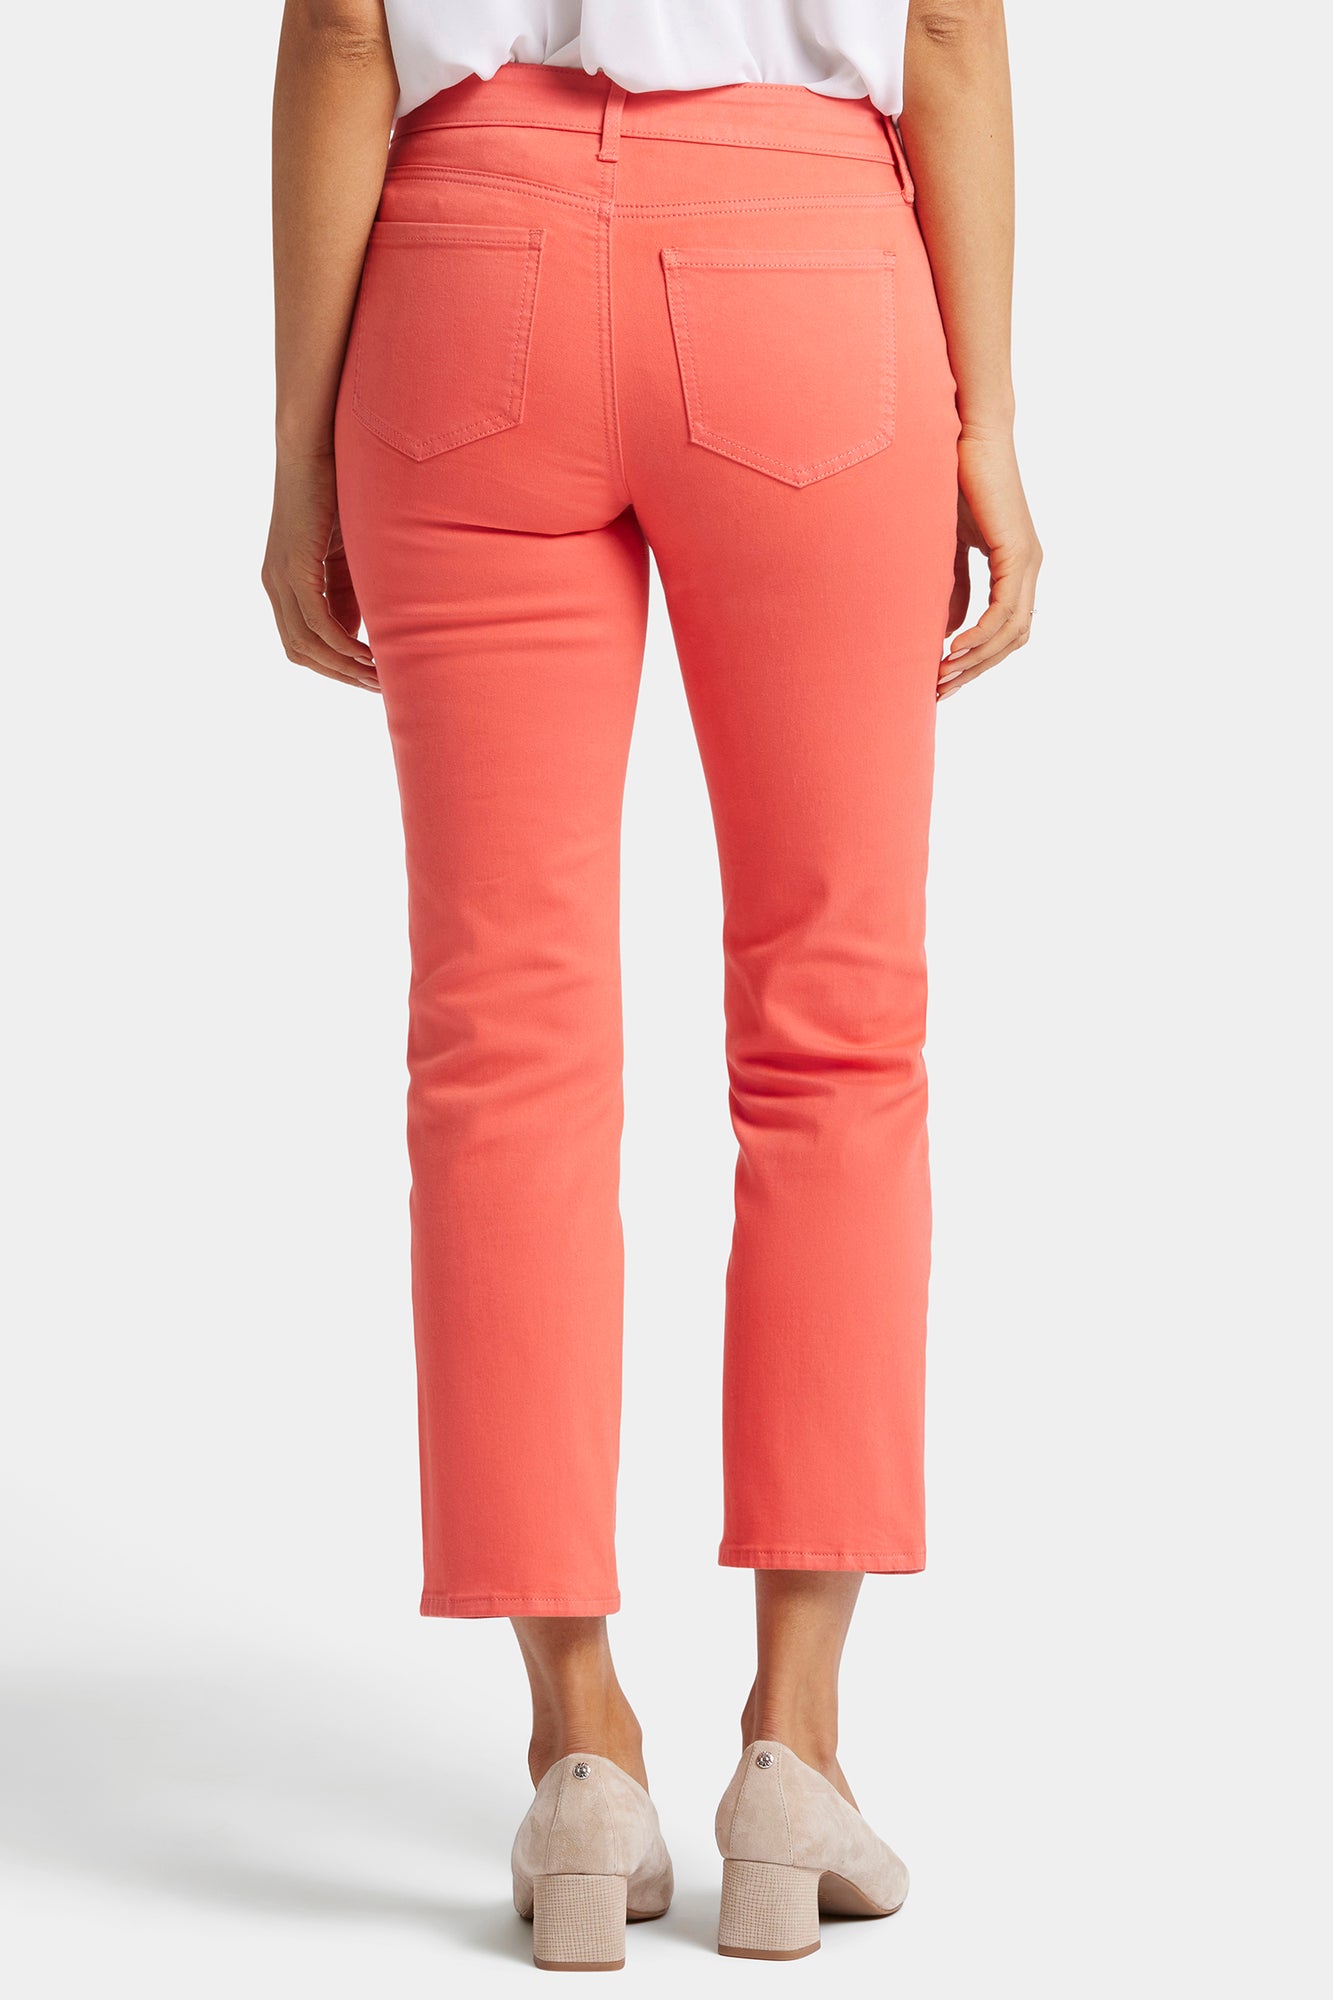 NYDJ Marilyn Straight Ankle Jeans  - Fruit Punch